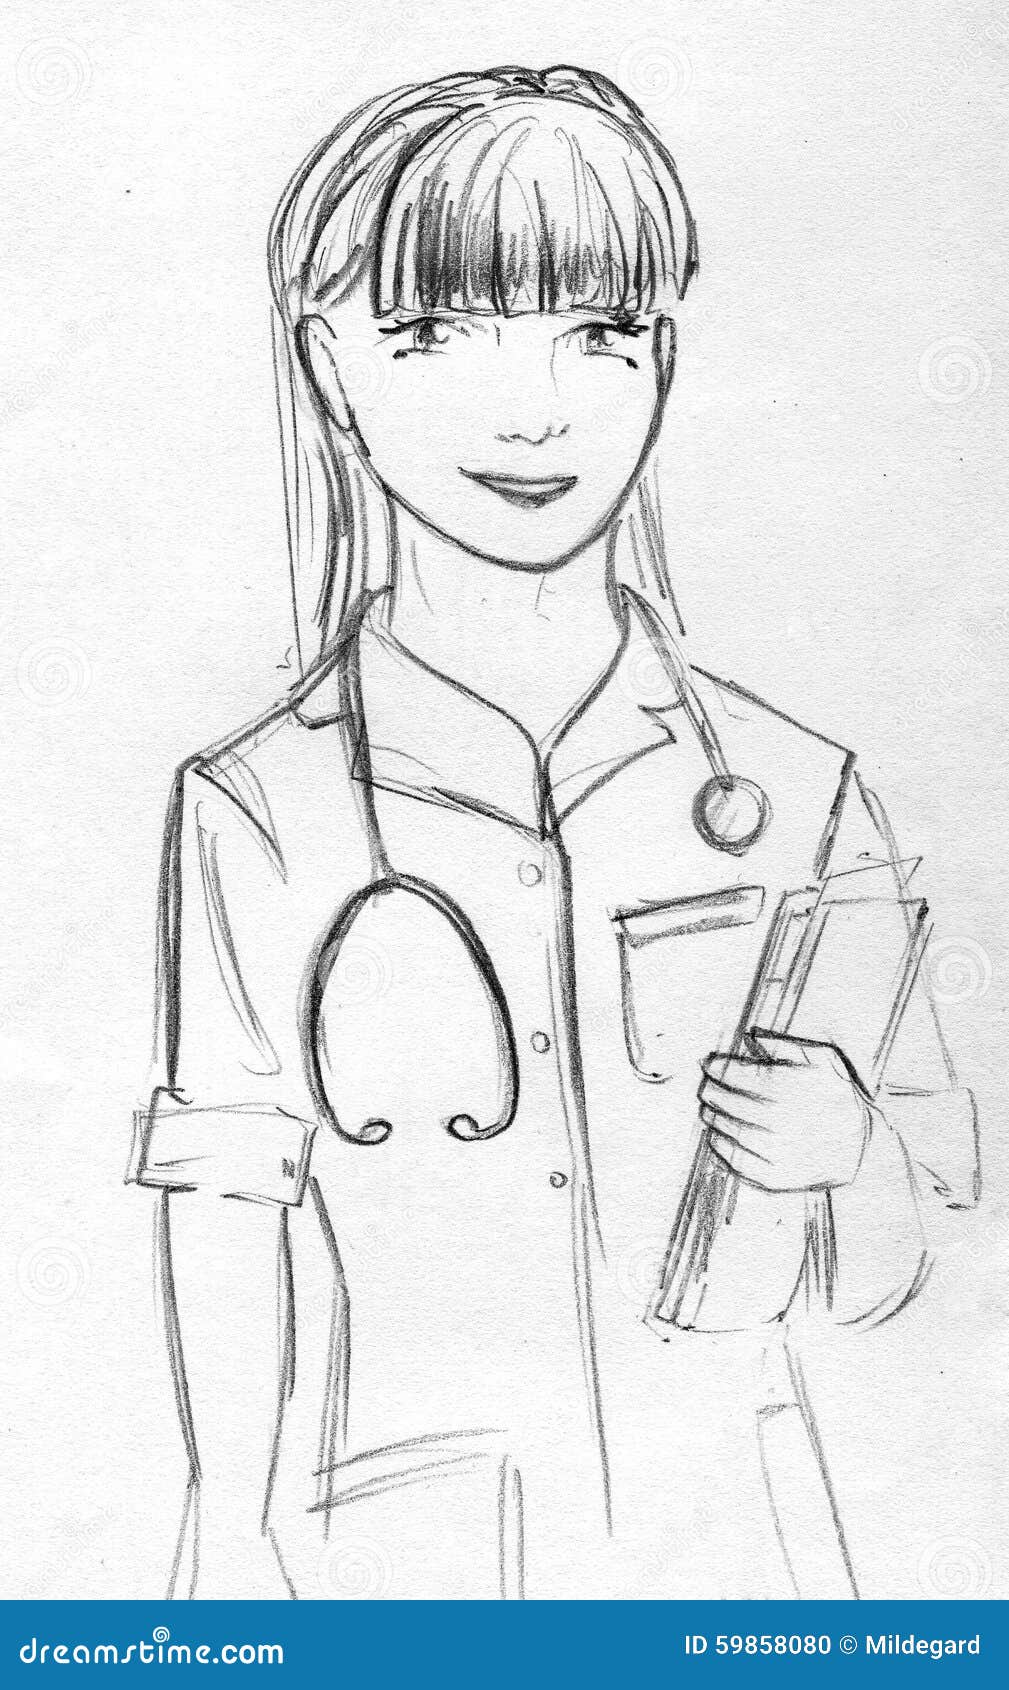 HOW TO DRAW A REALISTIC MEDICAL PROFESSIONAL Step by Step Pencil Drawing  Tutorial Nurse sketch  YouTube